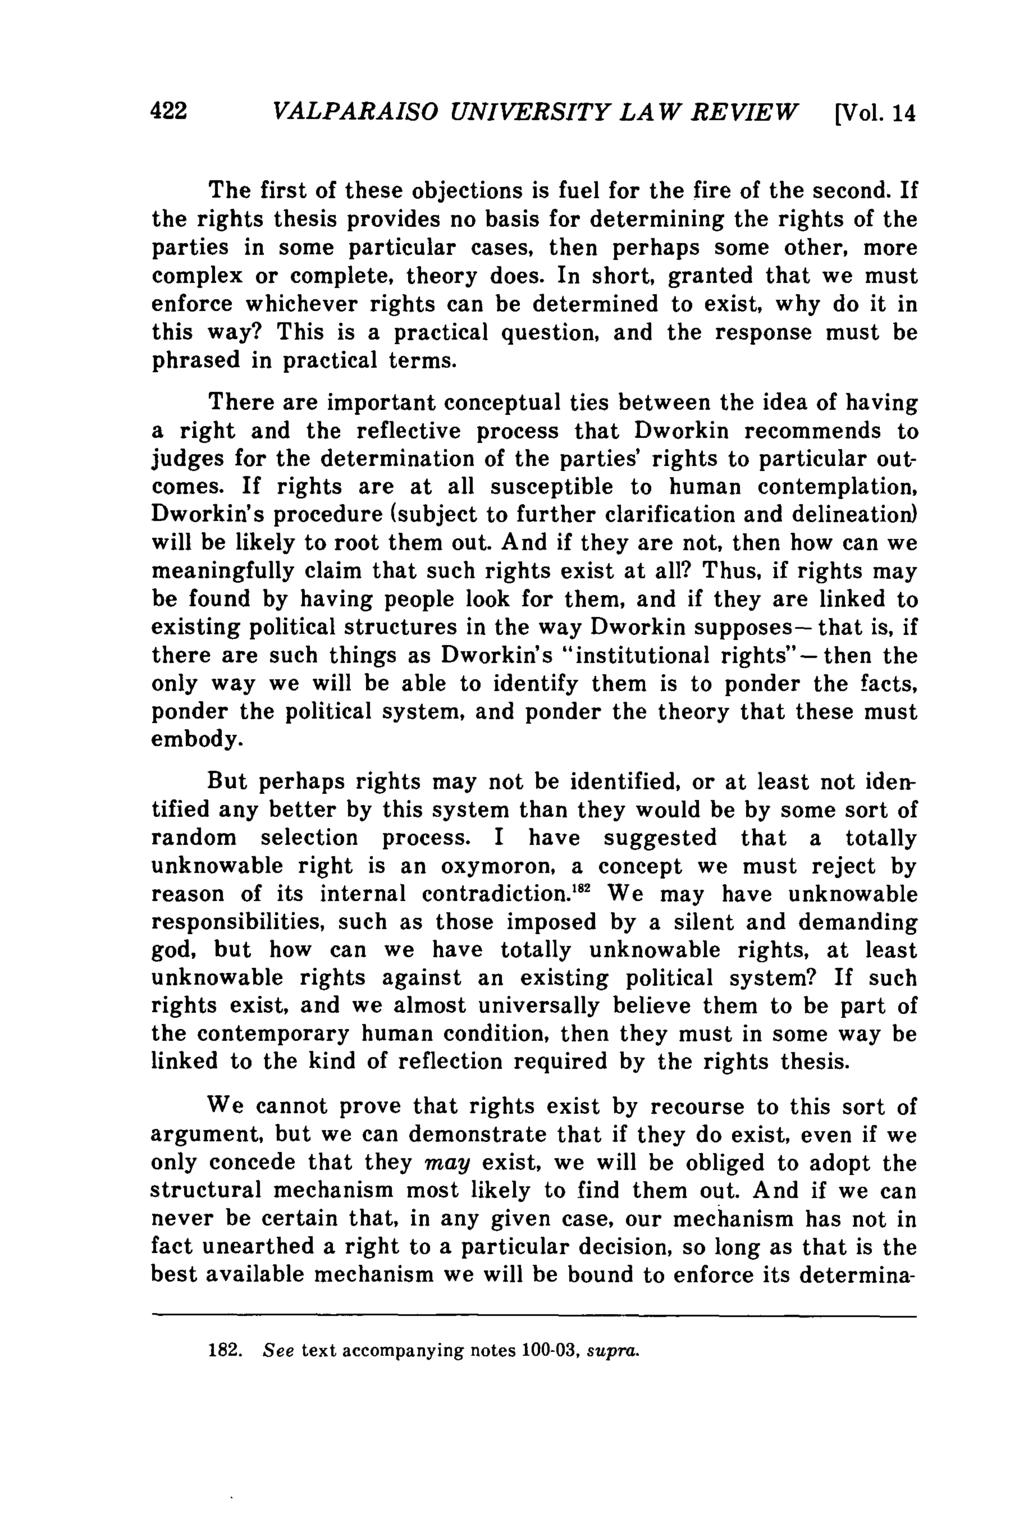 Valparaiso University Law Review, Vol. 14, No. 3 [1980], Art. 1 422 VALPARAISO UNIVERSITY LAW REVIEW [Vol. 14 The first of these objections is fuel for the fire of the second.